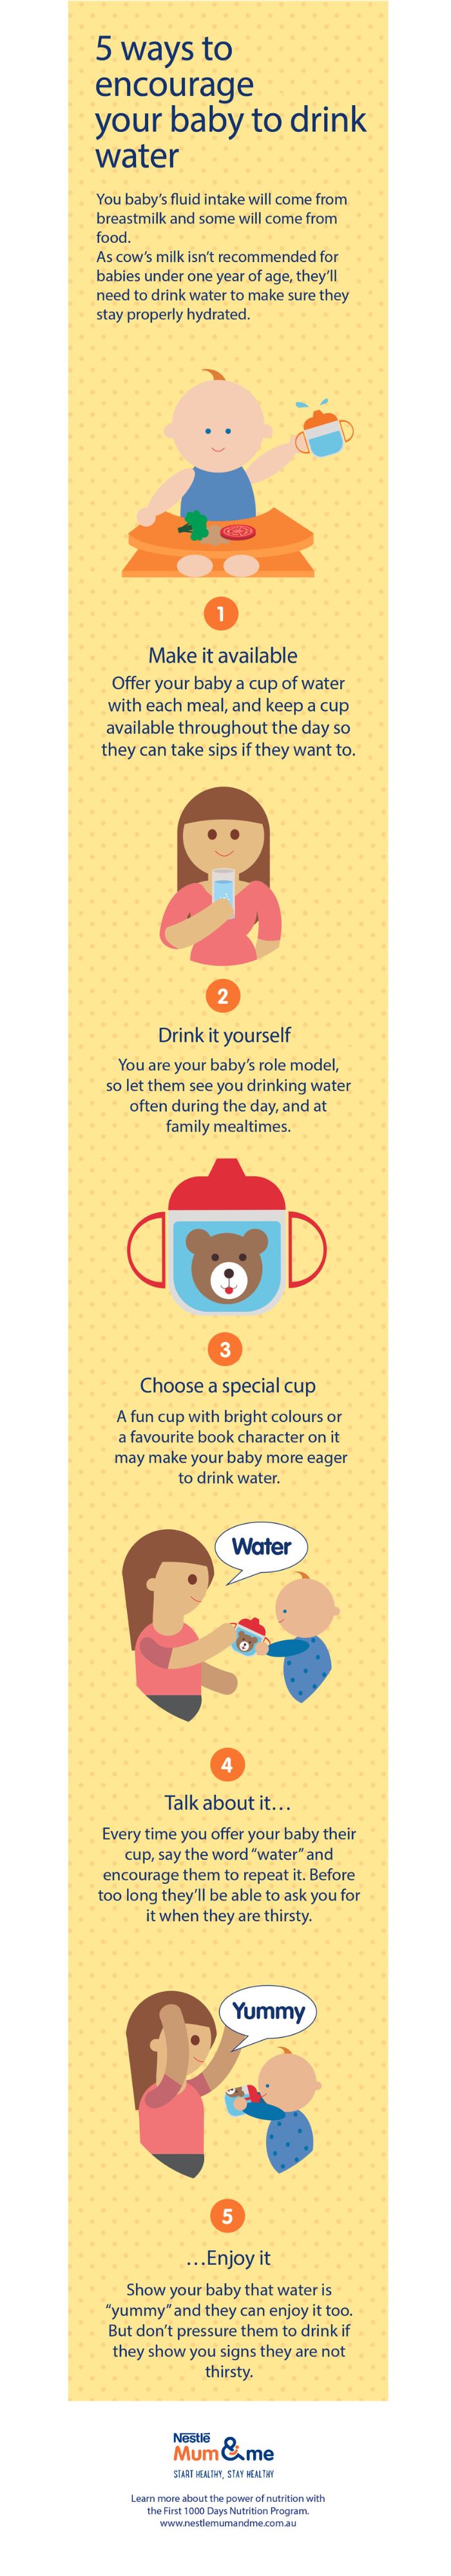 5 ways to encourage your baby to drink water